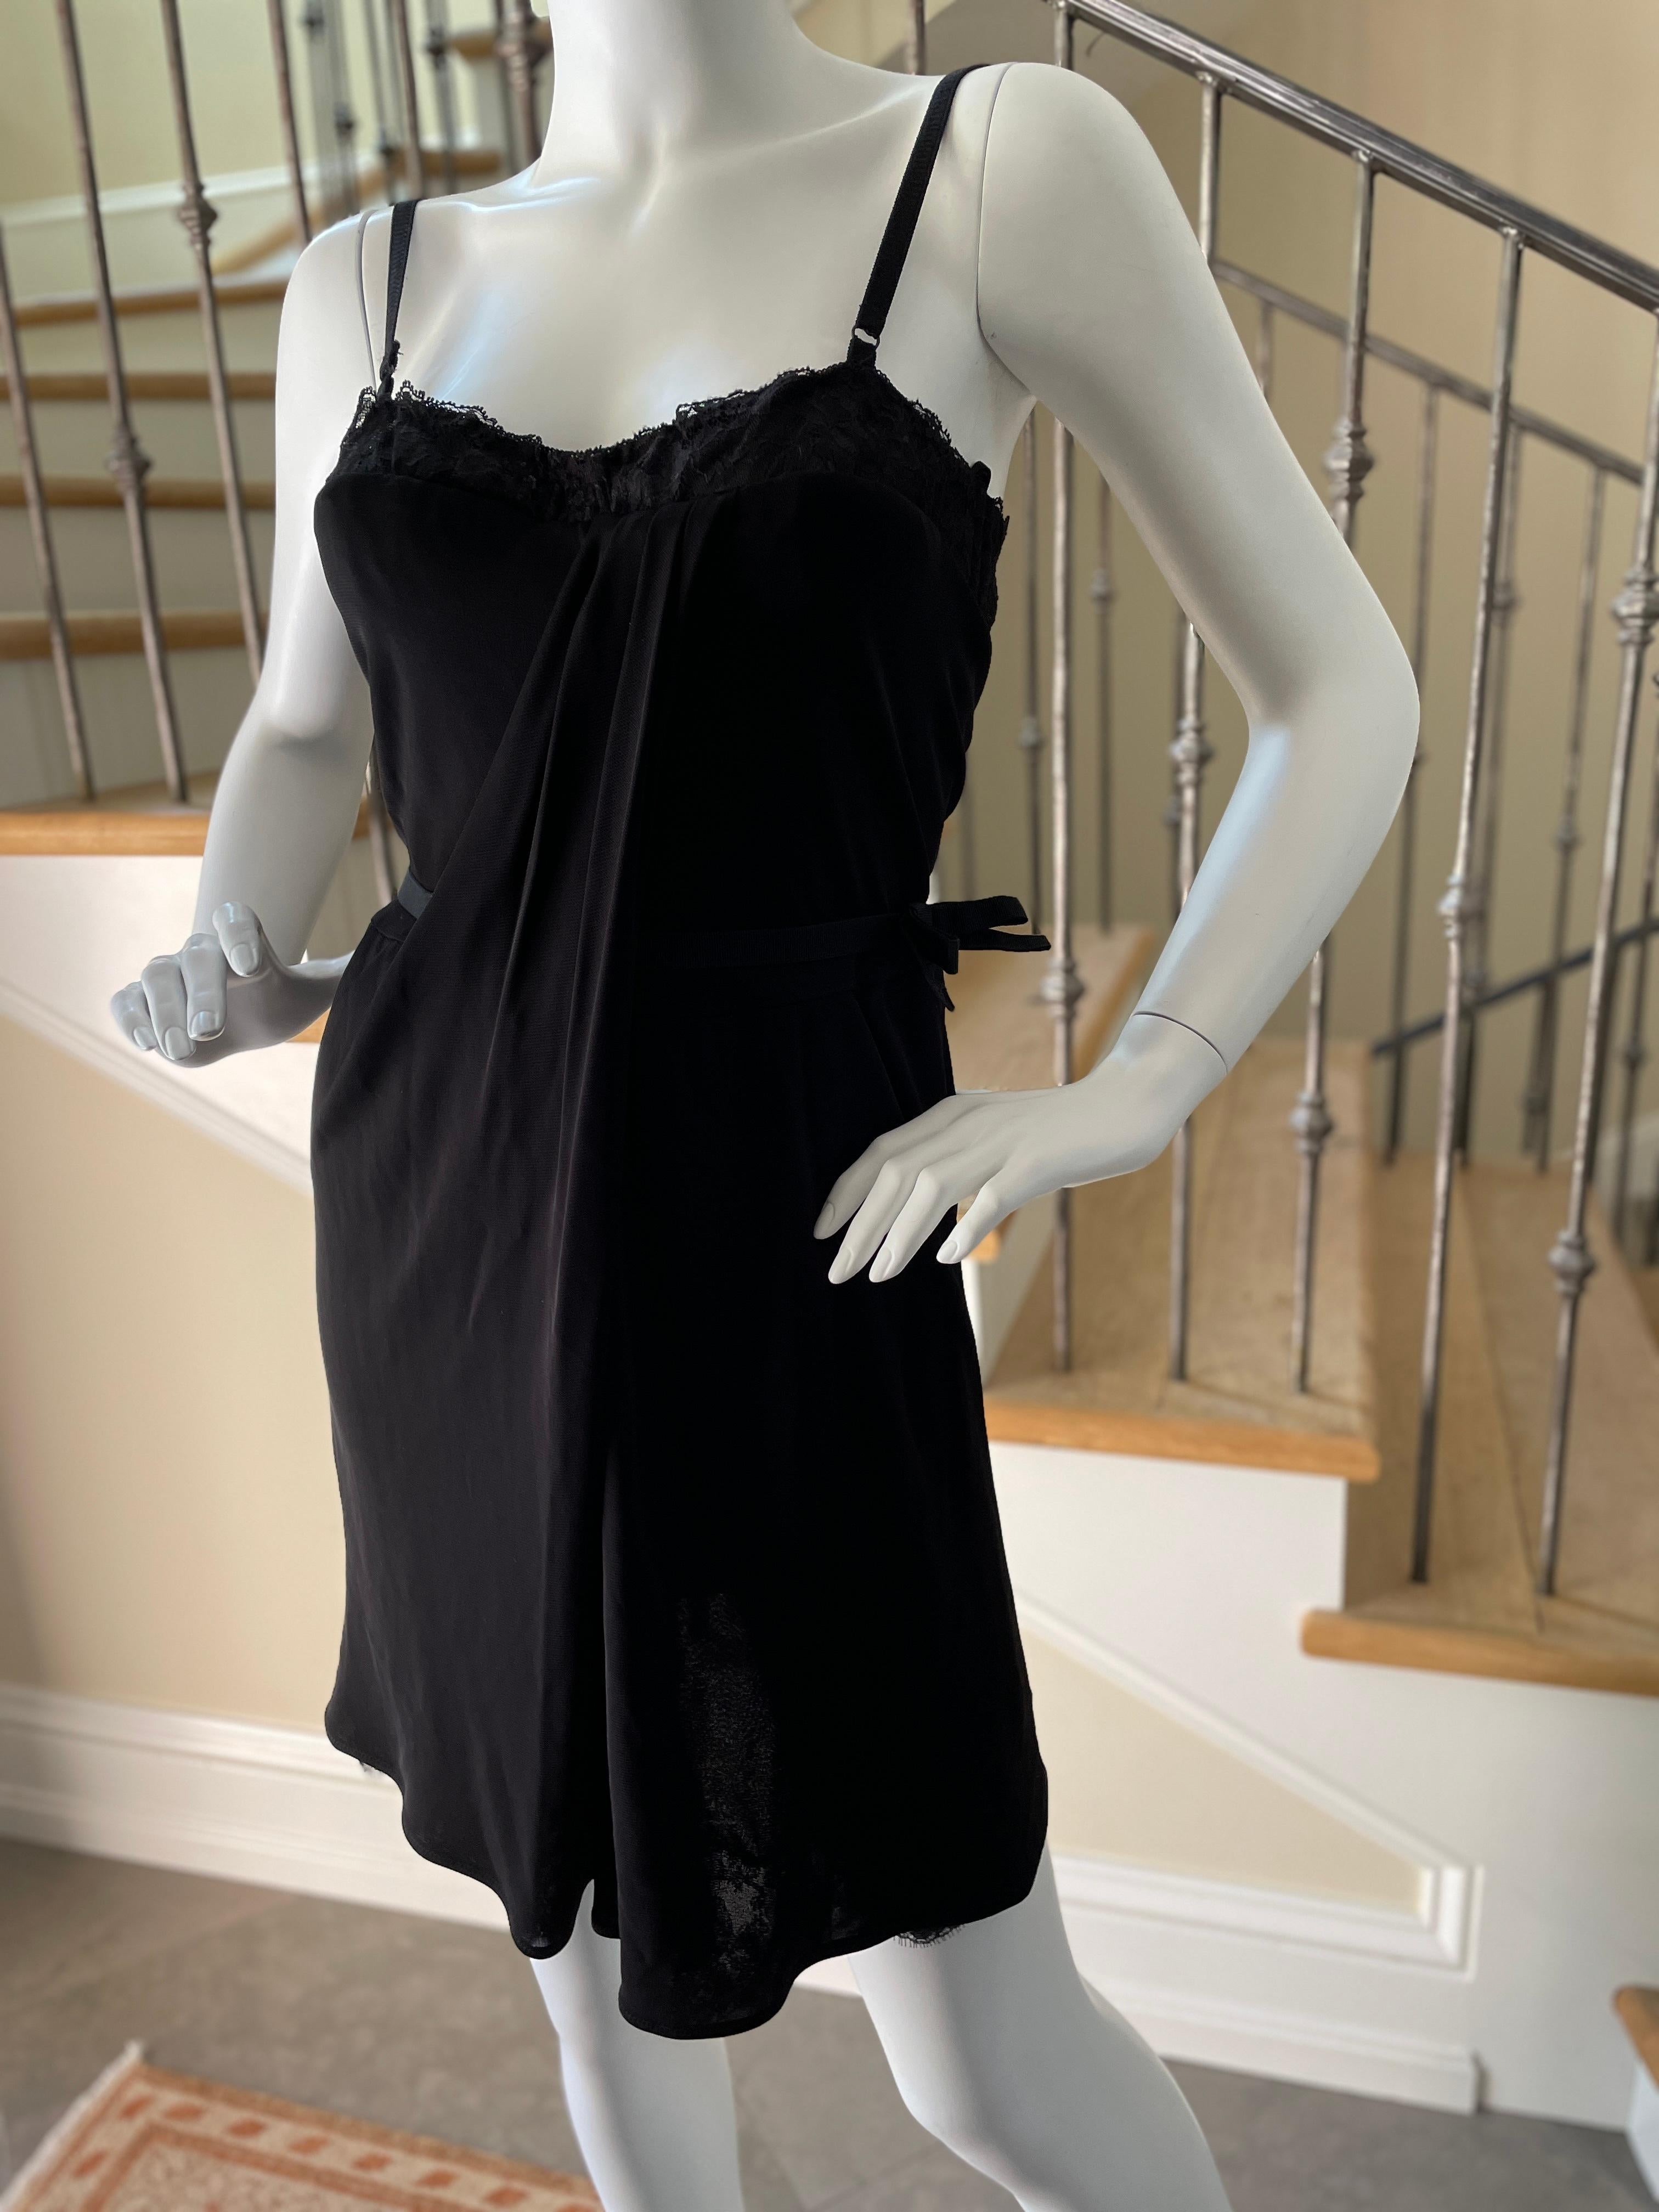 D&G by Dolce & Gabbana Vintage Black Cocktail Dress with Inner Corset NWT For Sale 2